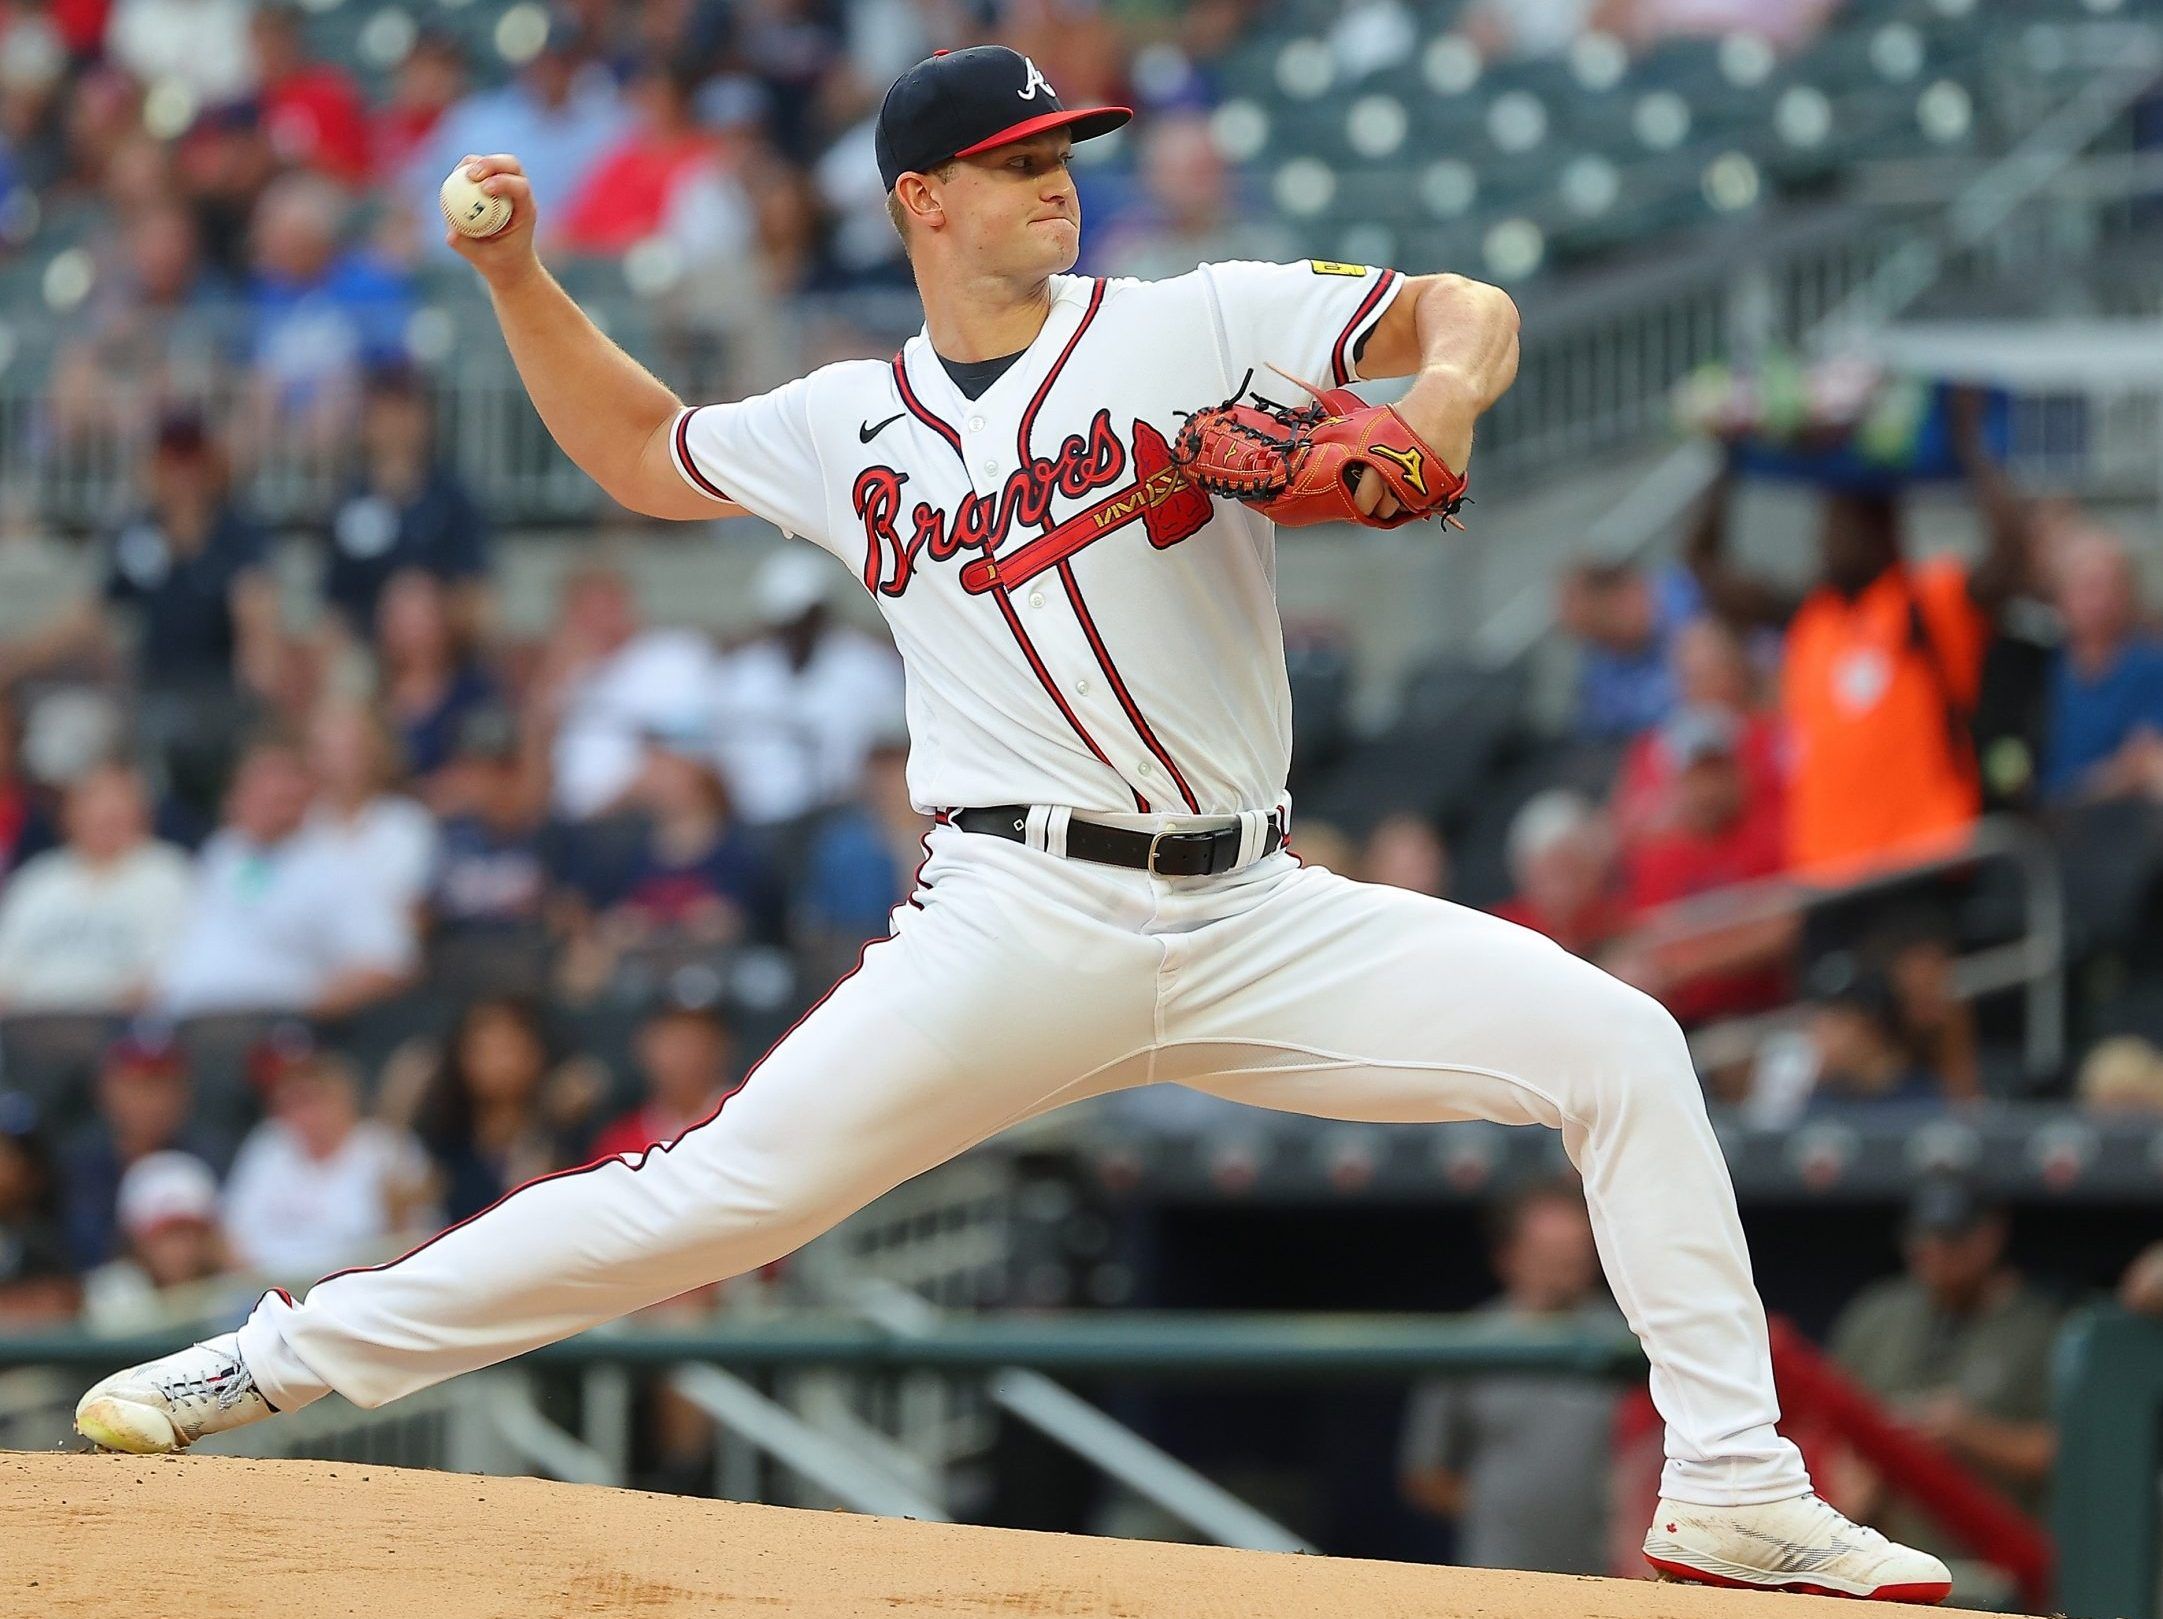 Braves pitcher Michael Soroka goes 6 innings, loses to A's in long-awaited  return to mound